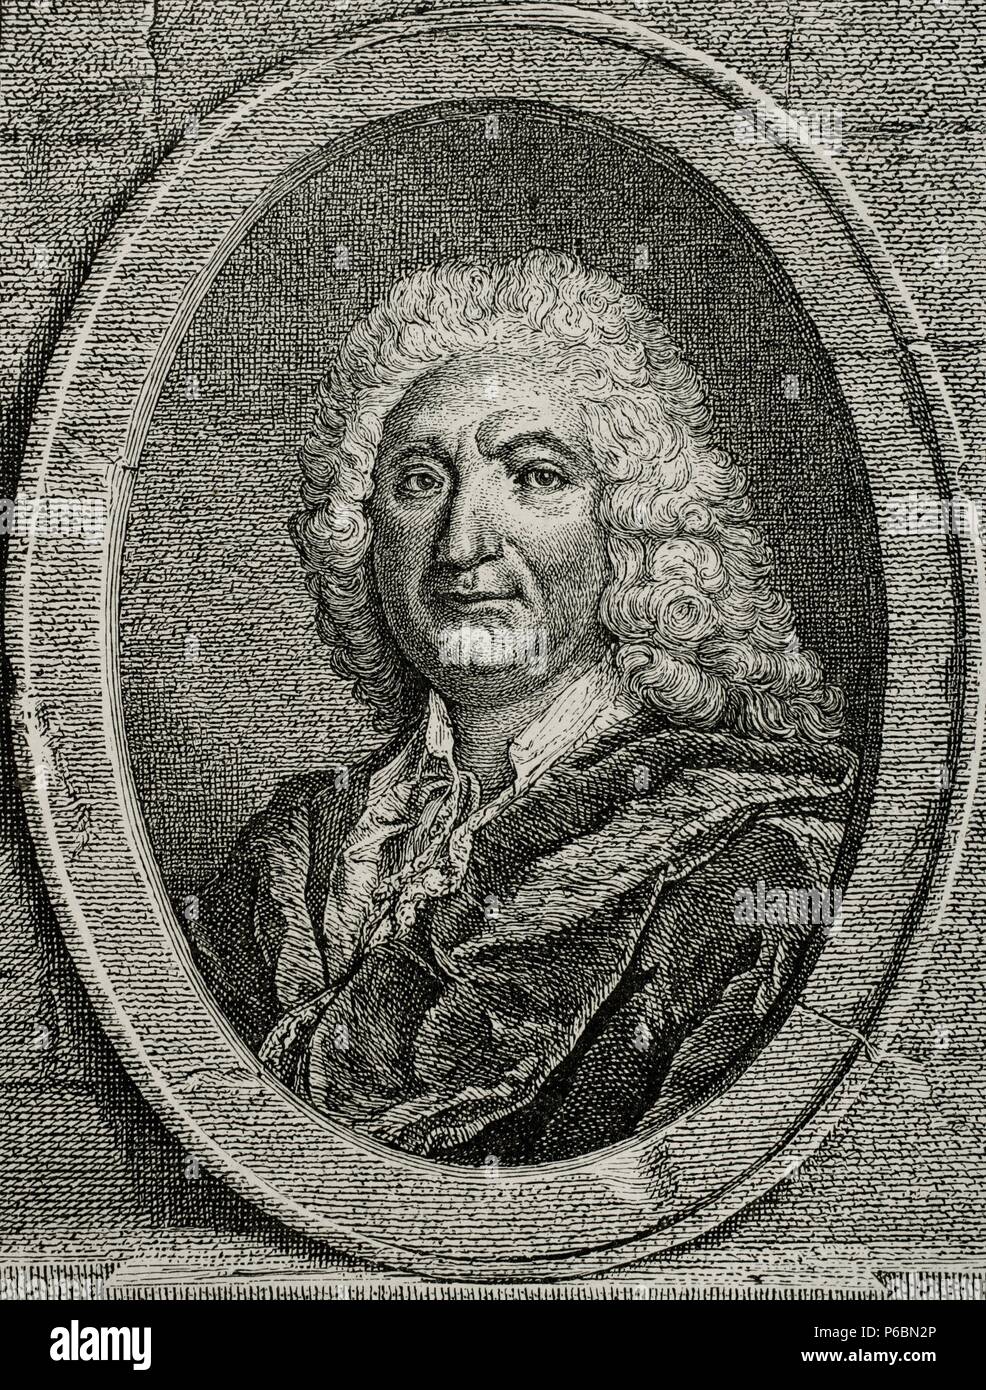 Alain-Rene Lesage (1668- 1747). French novelist and playwright. Best known for picaresque novel Gil Blas. Engraving. Universal History, 1885. Stock Photo